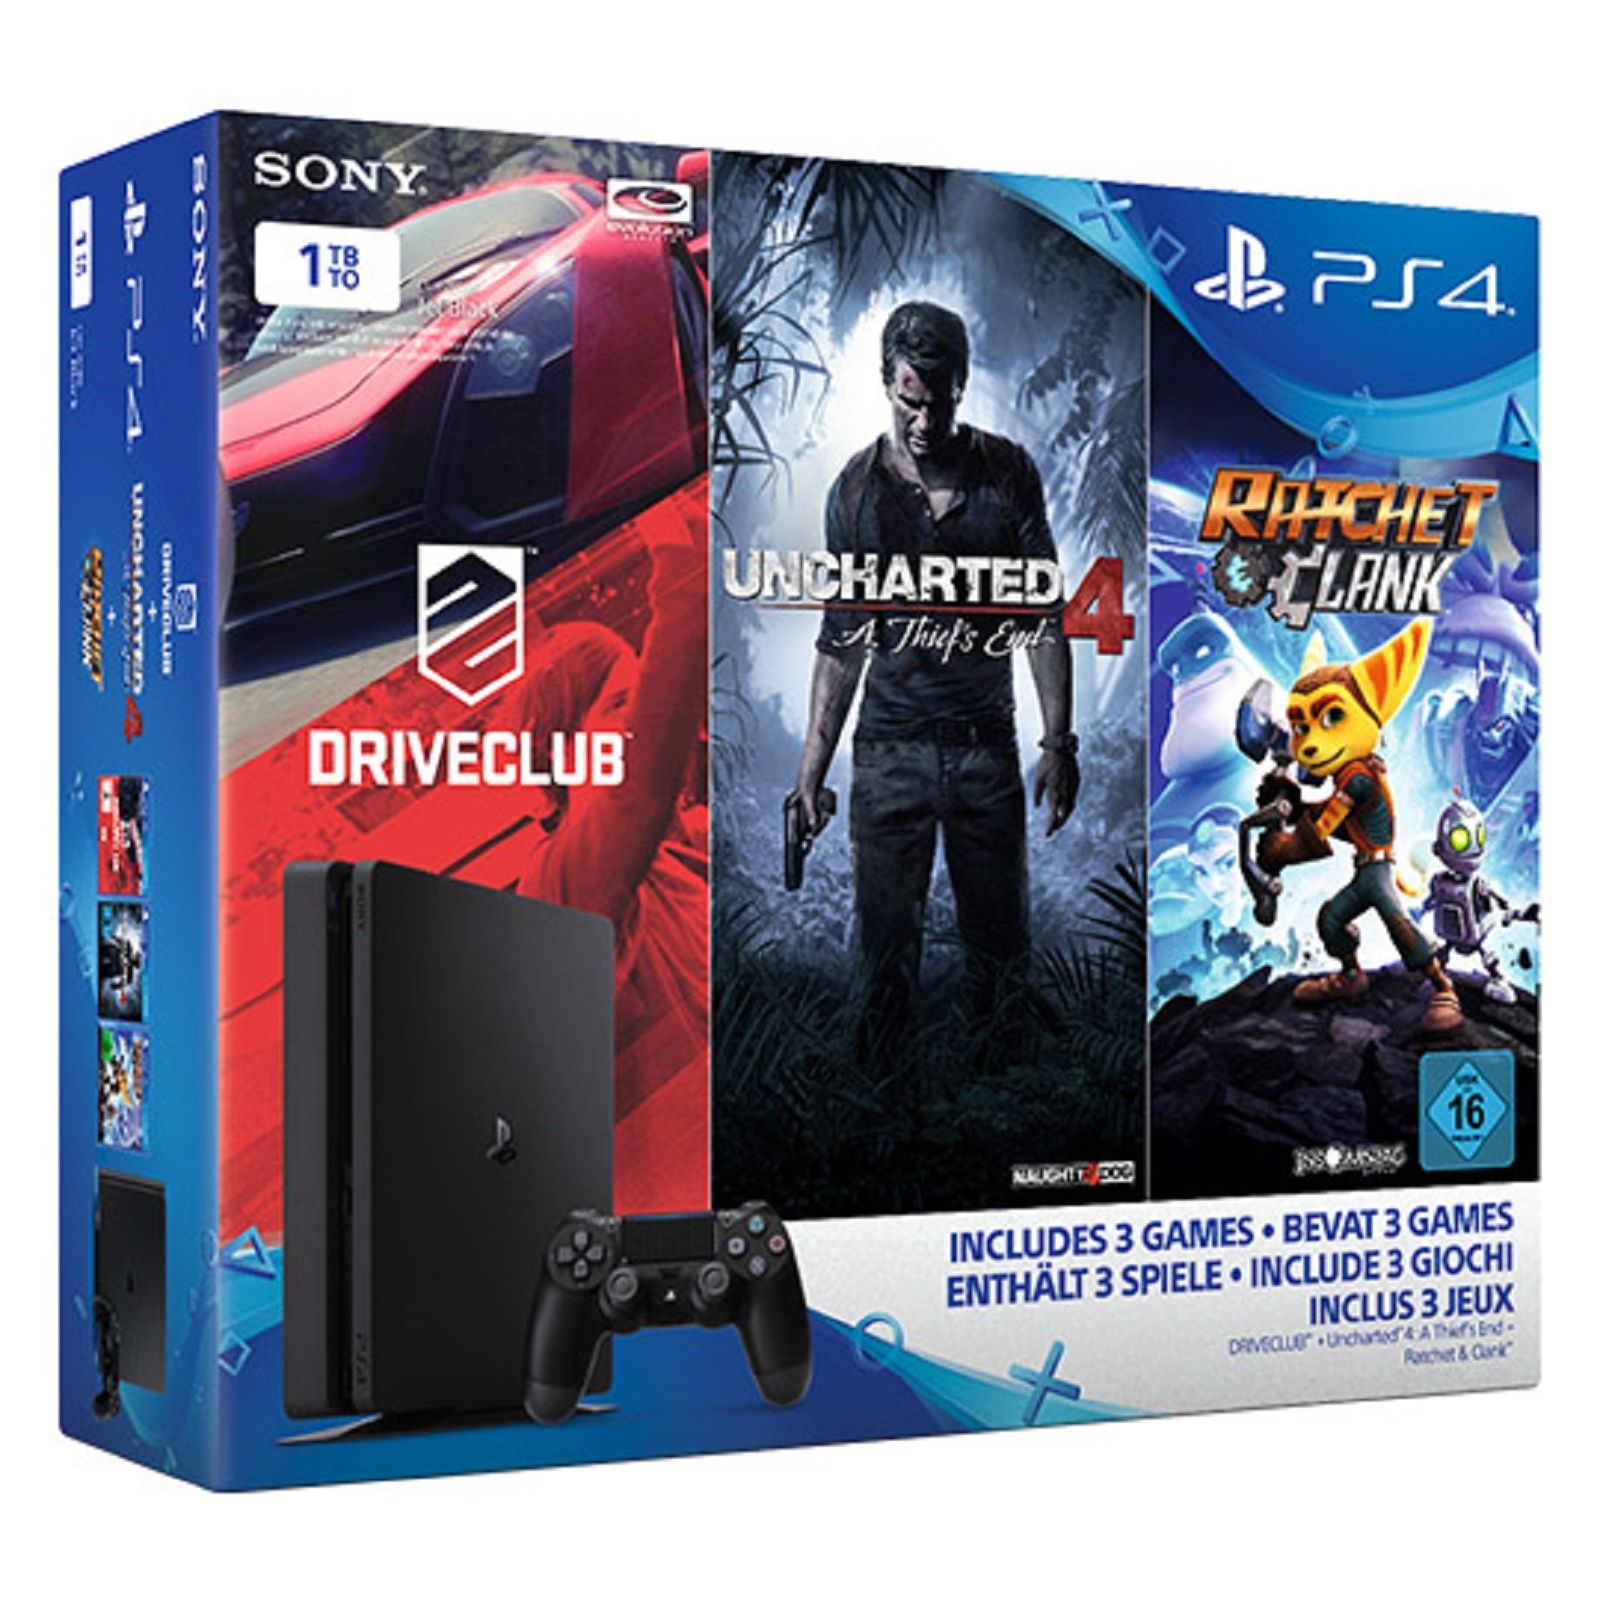 PS 4 Konsole 1TB Slim incl. DriveClub + Uncharted 4 + Ratchet & Clank *NEU&OVP*